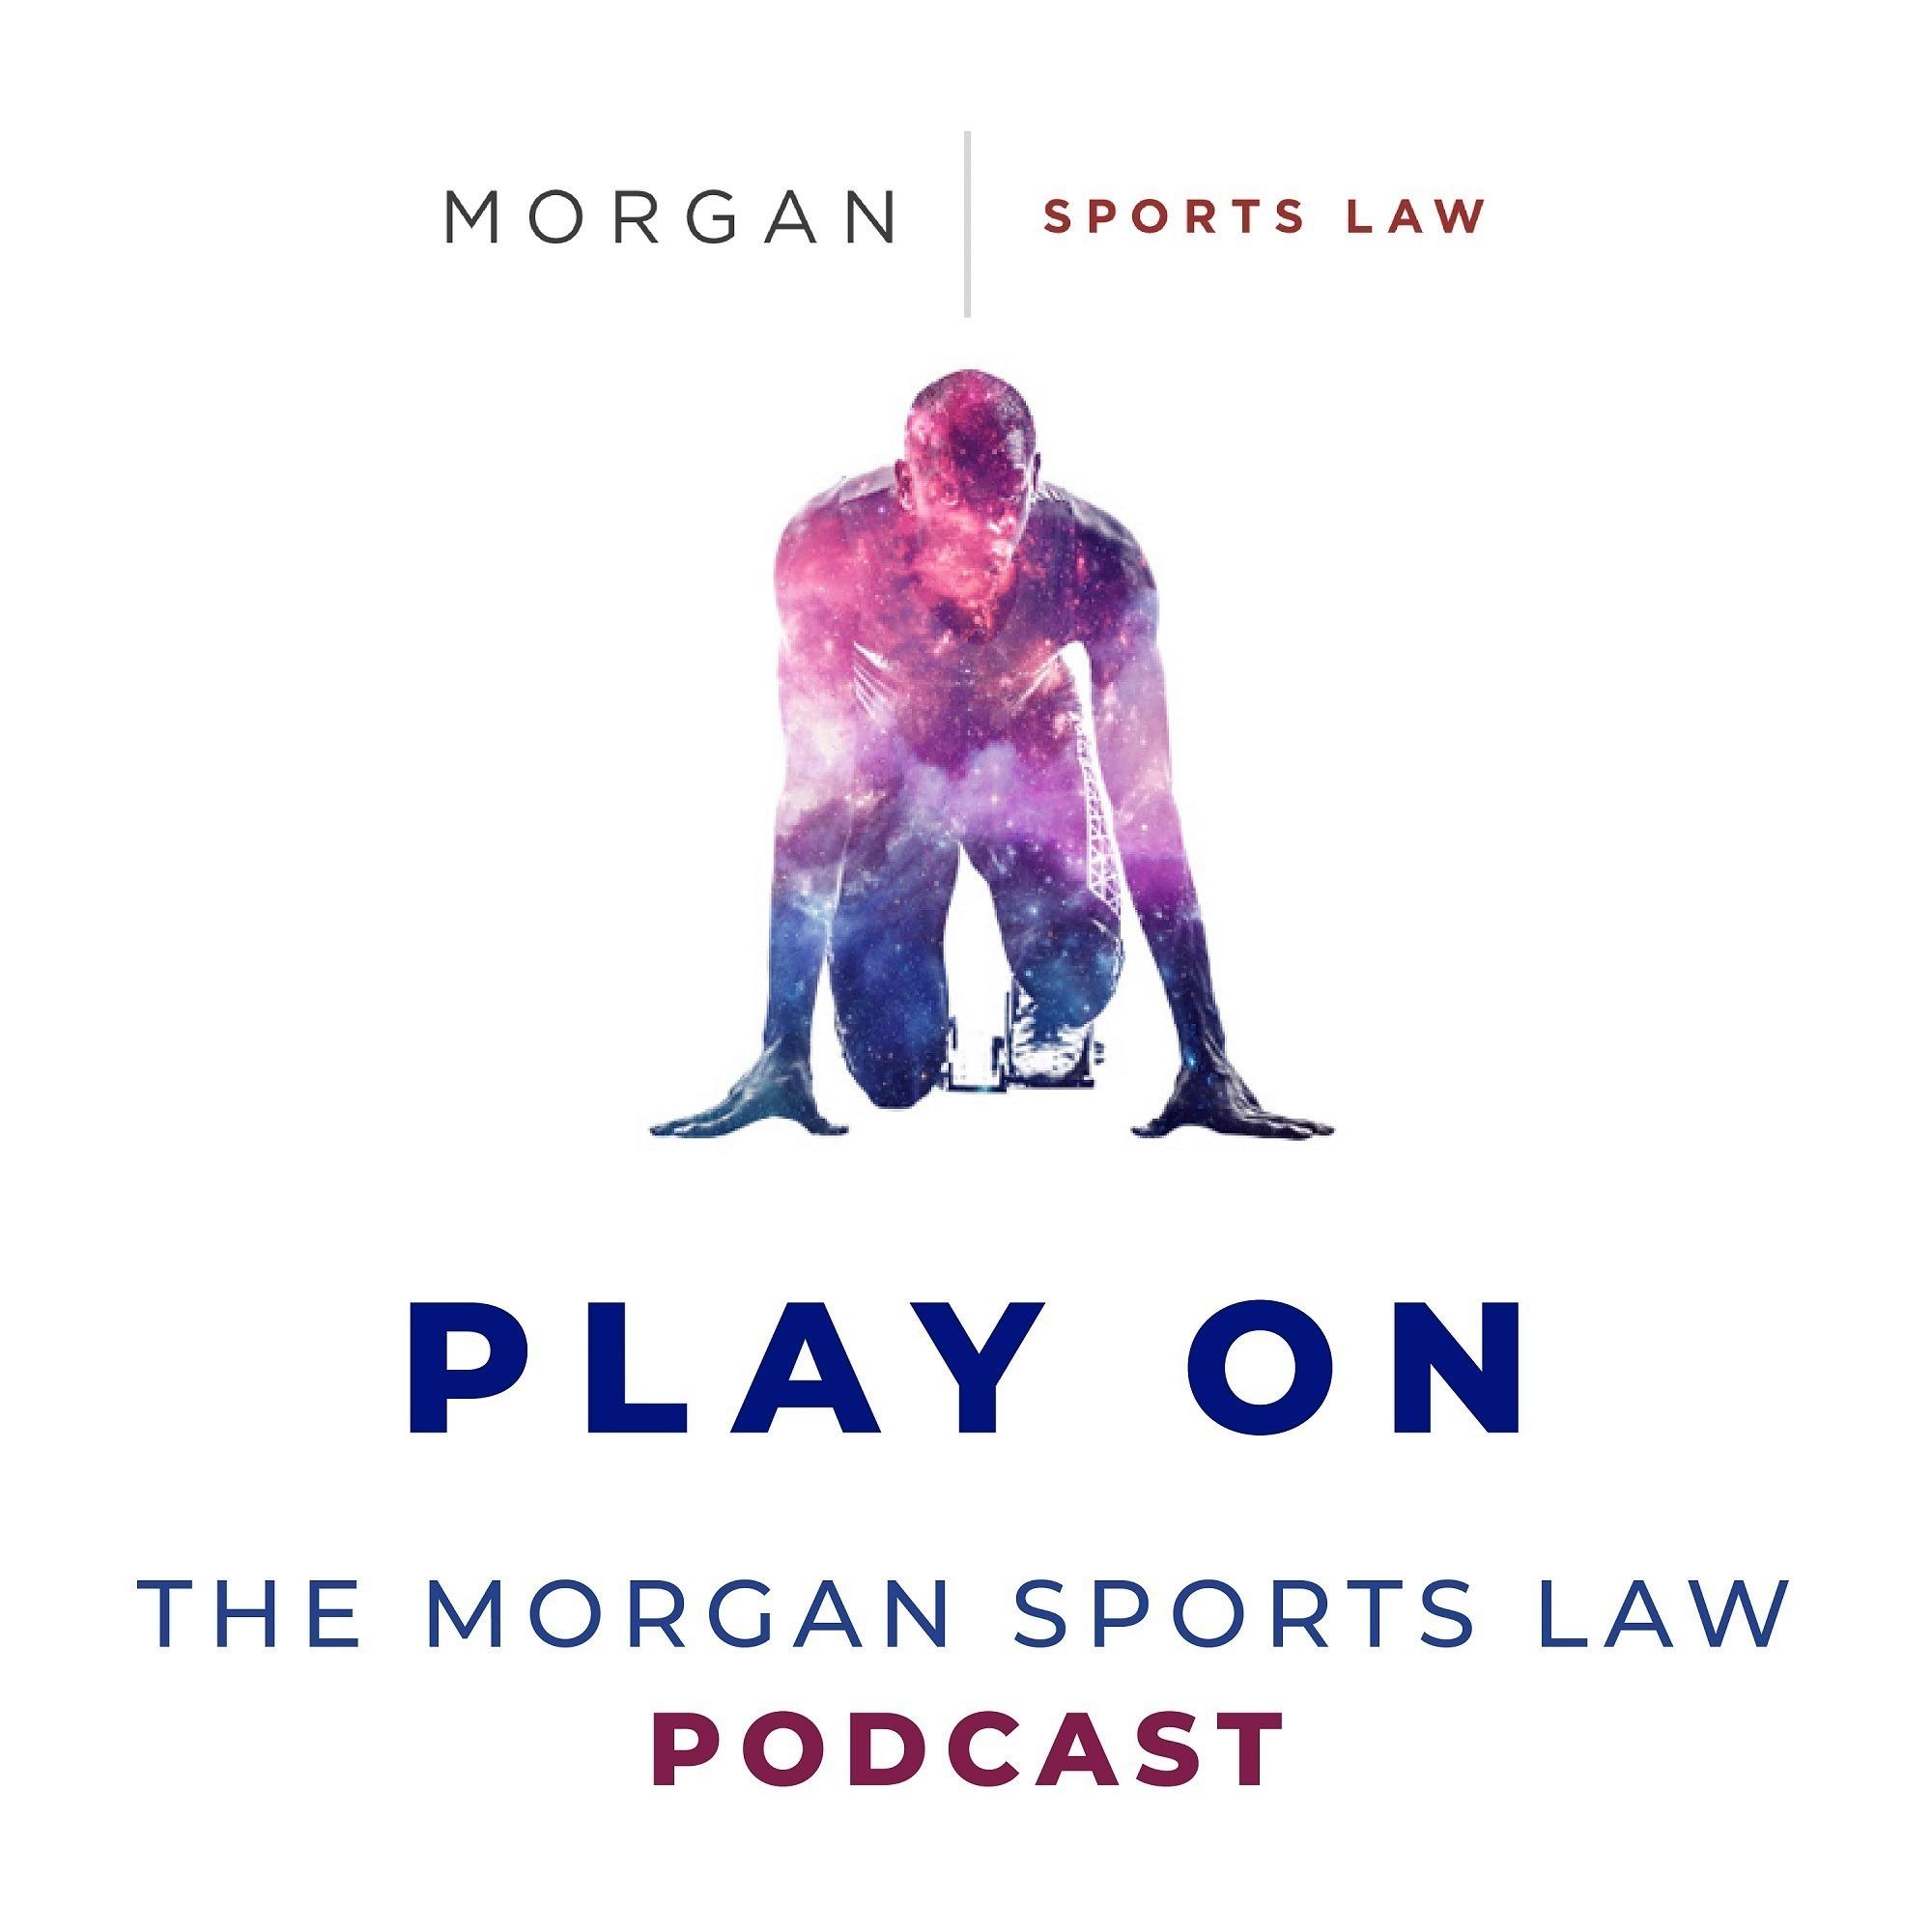 Play On the Morgan Sports Law Podcast